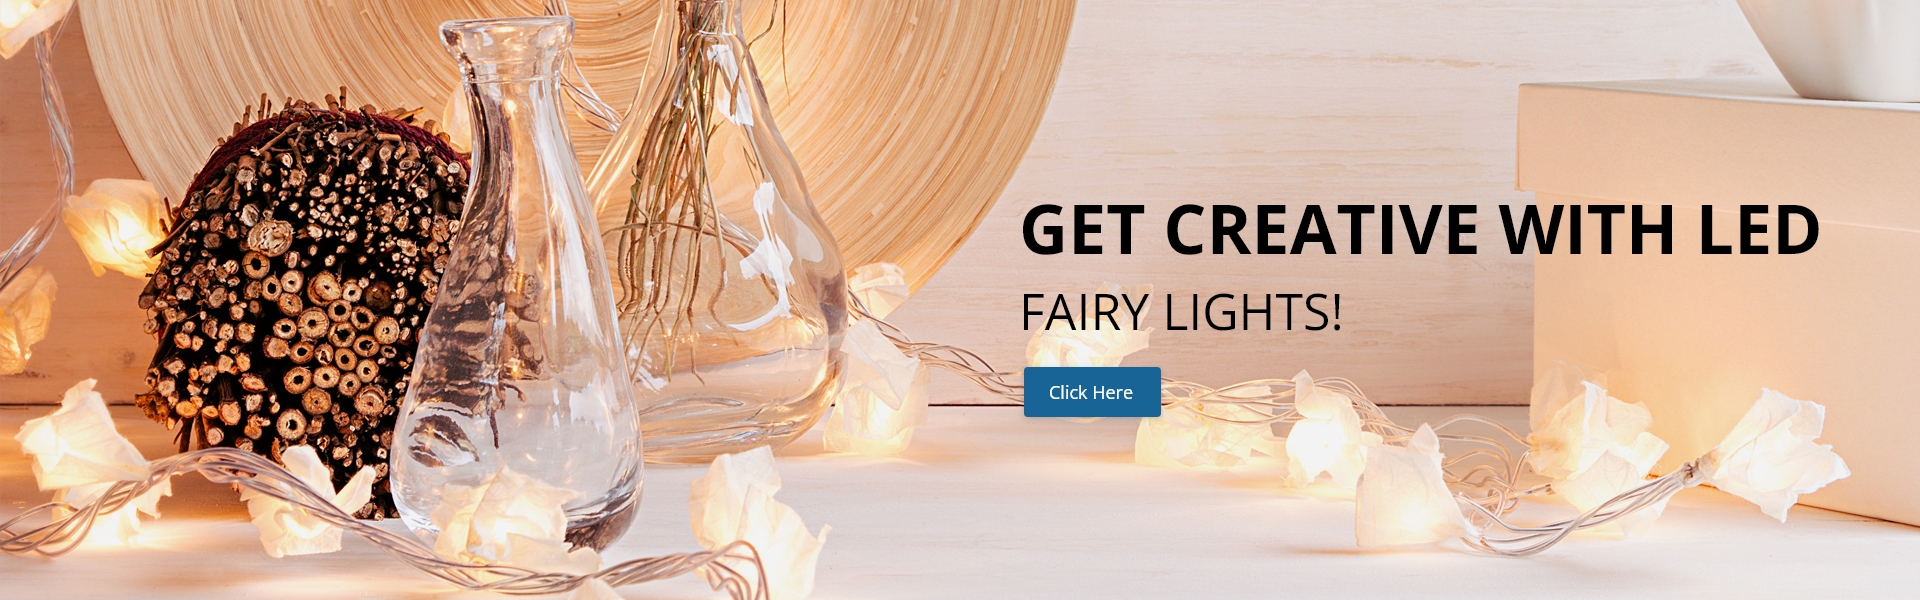 GET CREATIVE WITH LED FAIRY LIGHTS